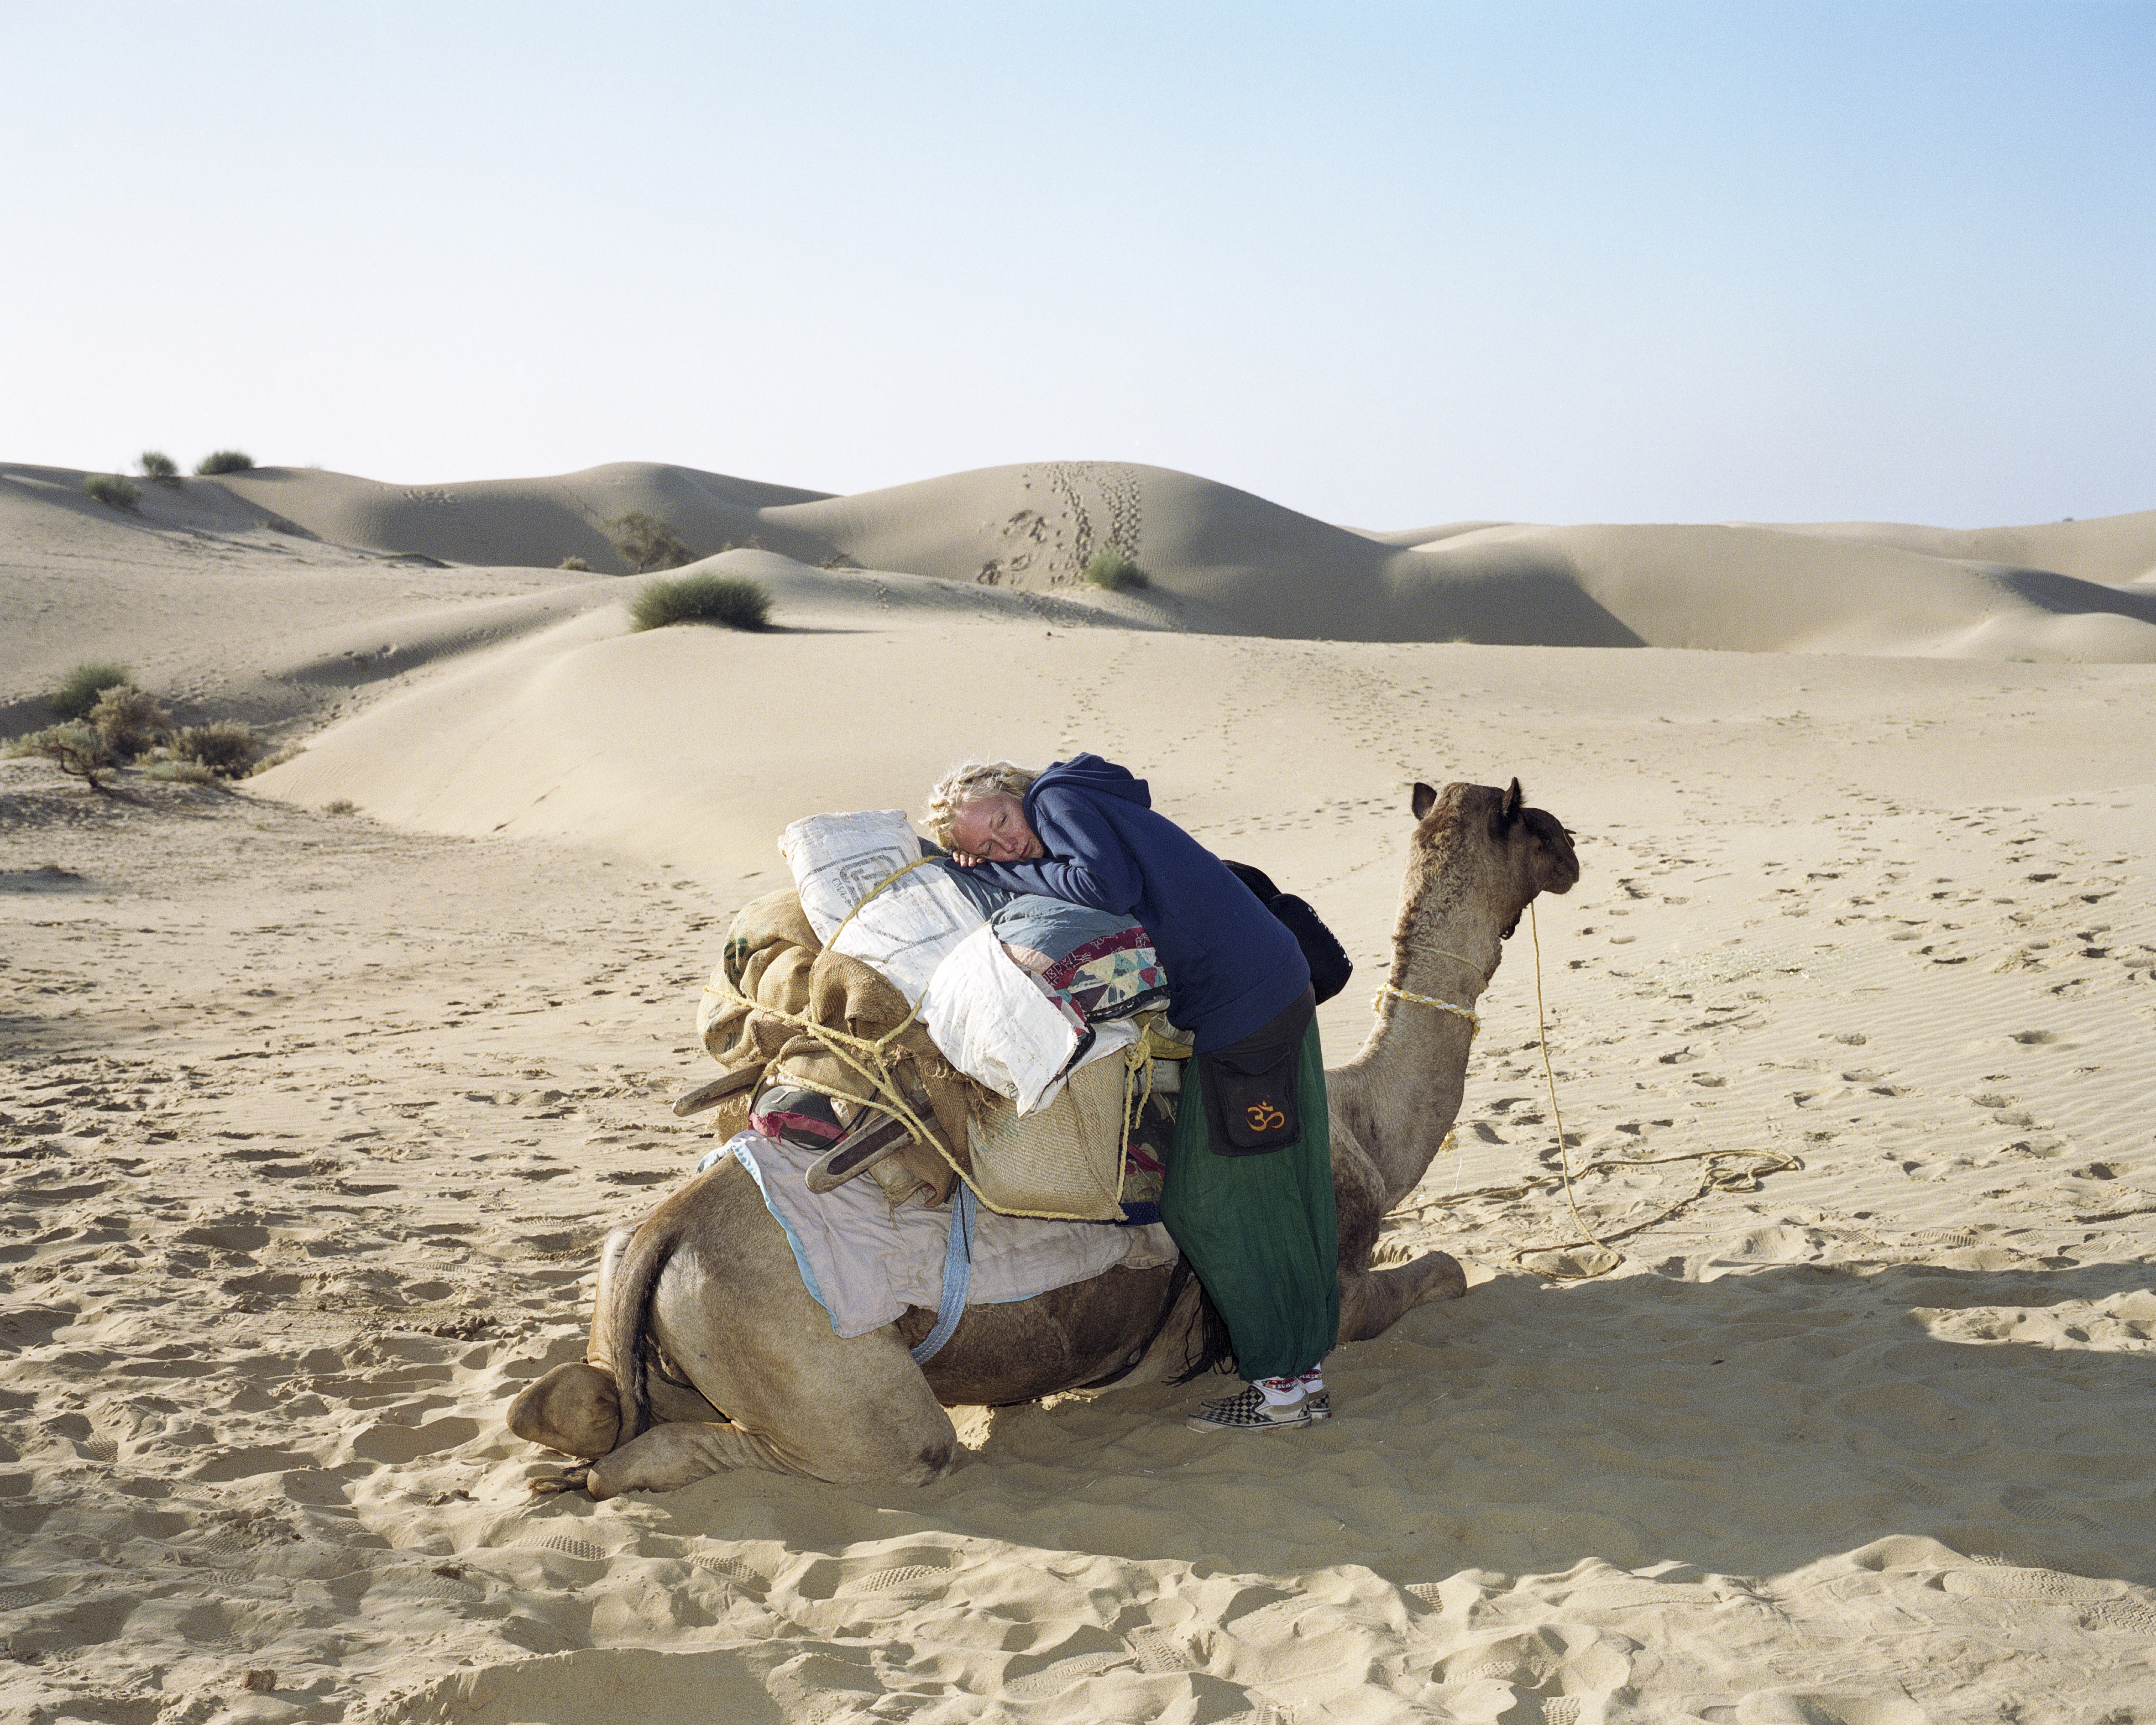 In the Thar desert, near to the Pakistani border, a Swedish backpacker waits for her camel safari to continue in Jaisalmer, India, December 2006.